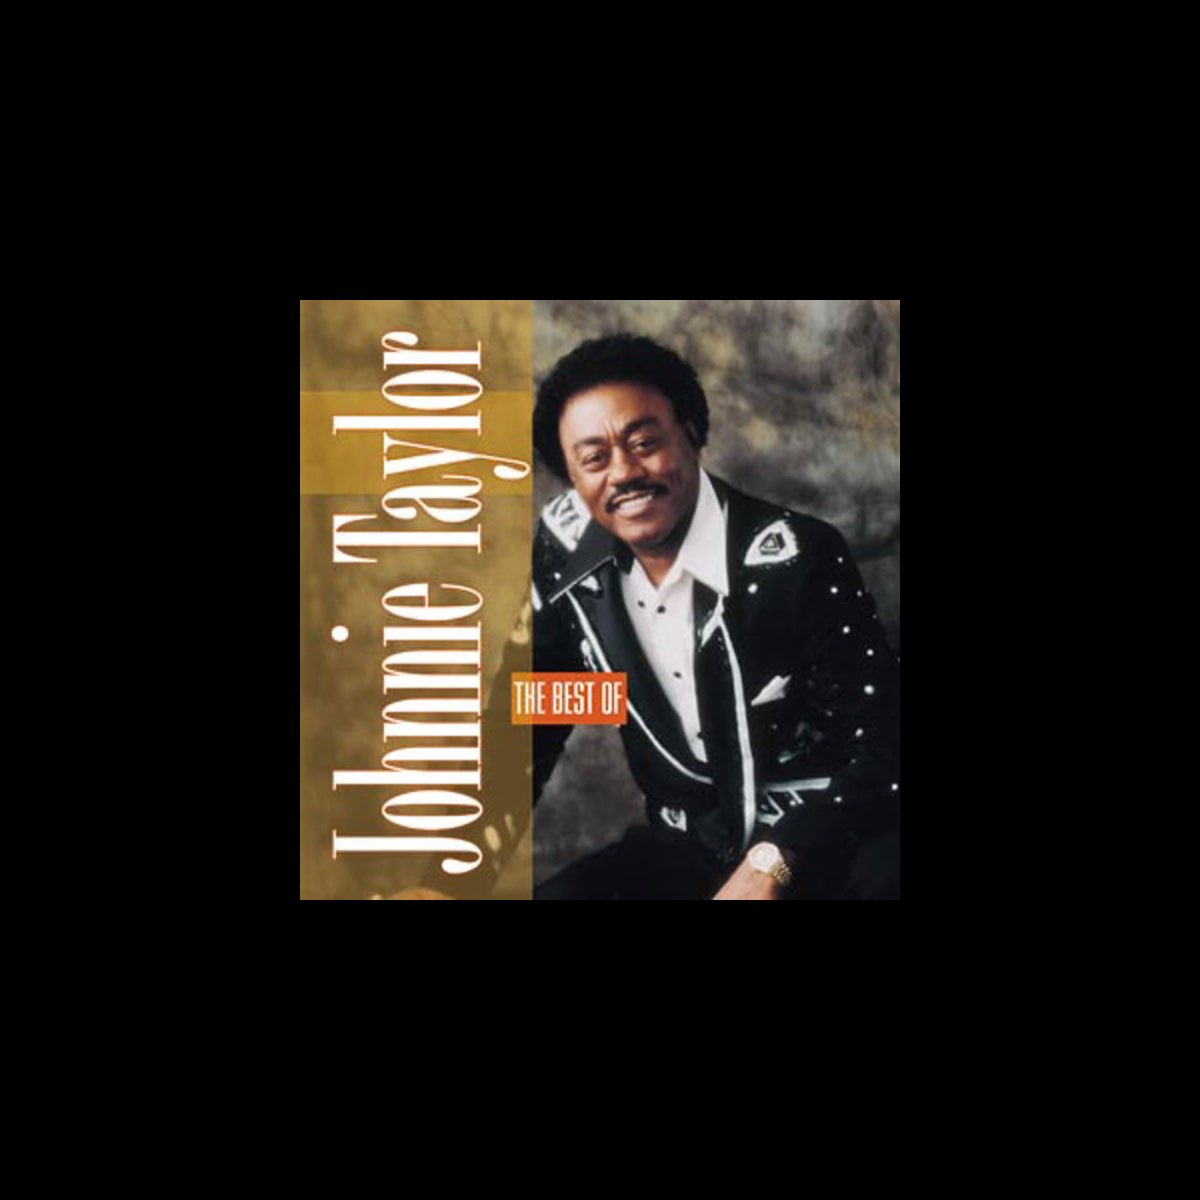 ‎The Best of Johnnie Taylor by Johnnie Taylor on Apple Music